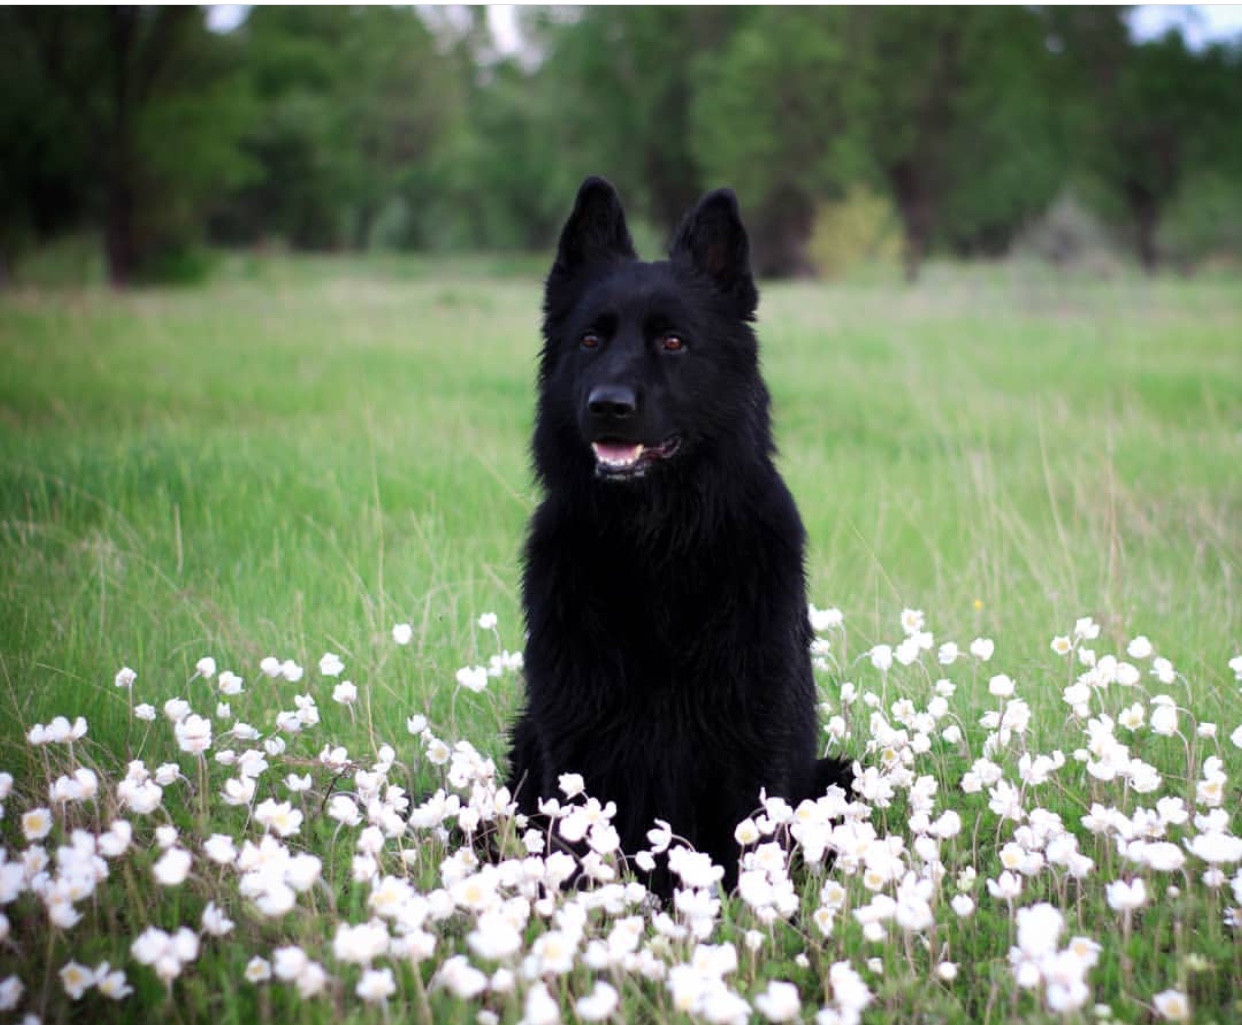 A black German Shepherd sitting in the field of grass with white flowers